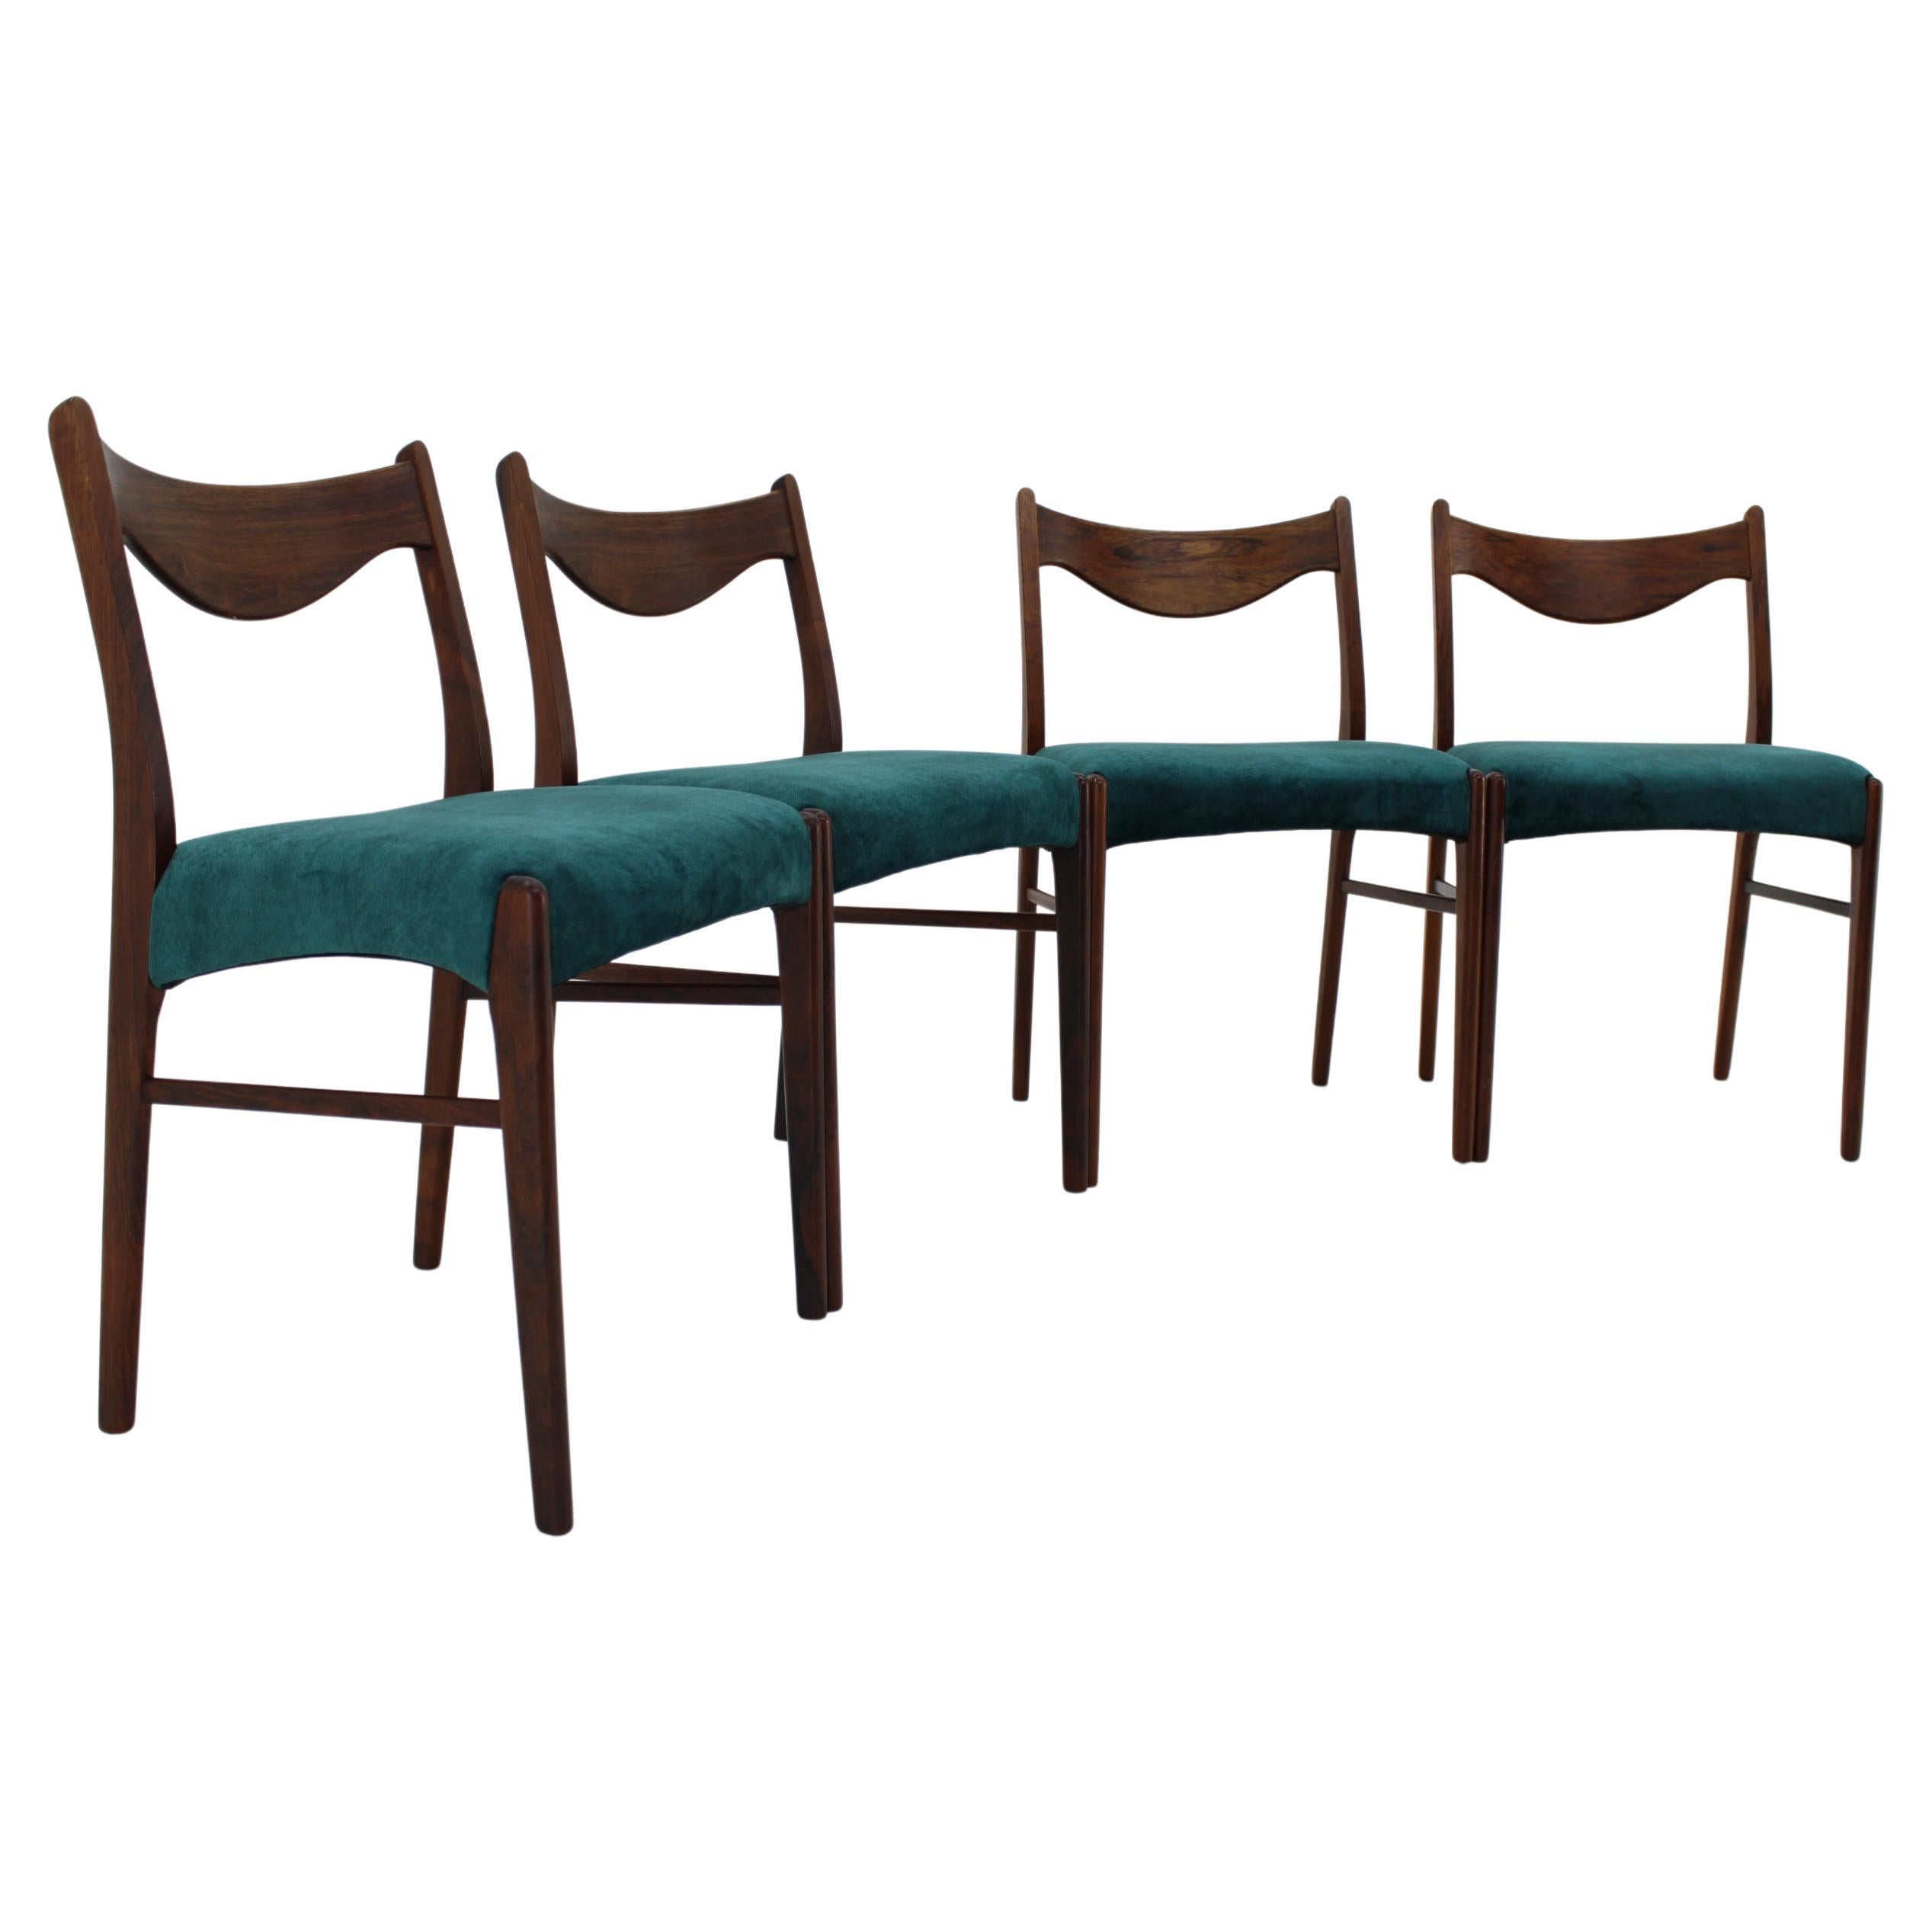 1960s Wahl Iversen Set of Four Dining Chairs for Glyngøre Stolefabrik, Denmark